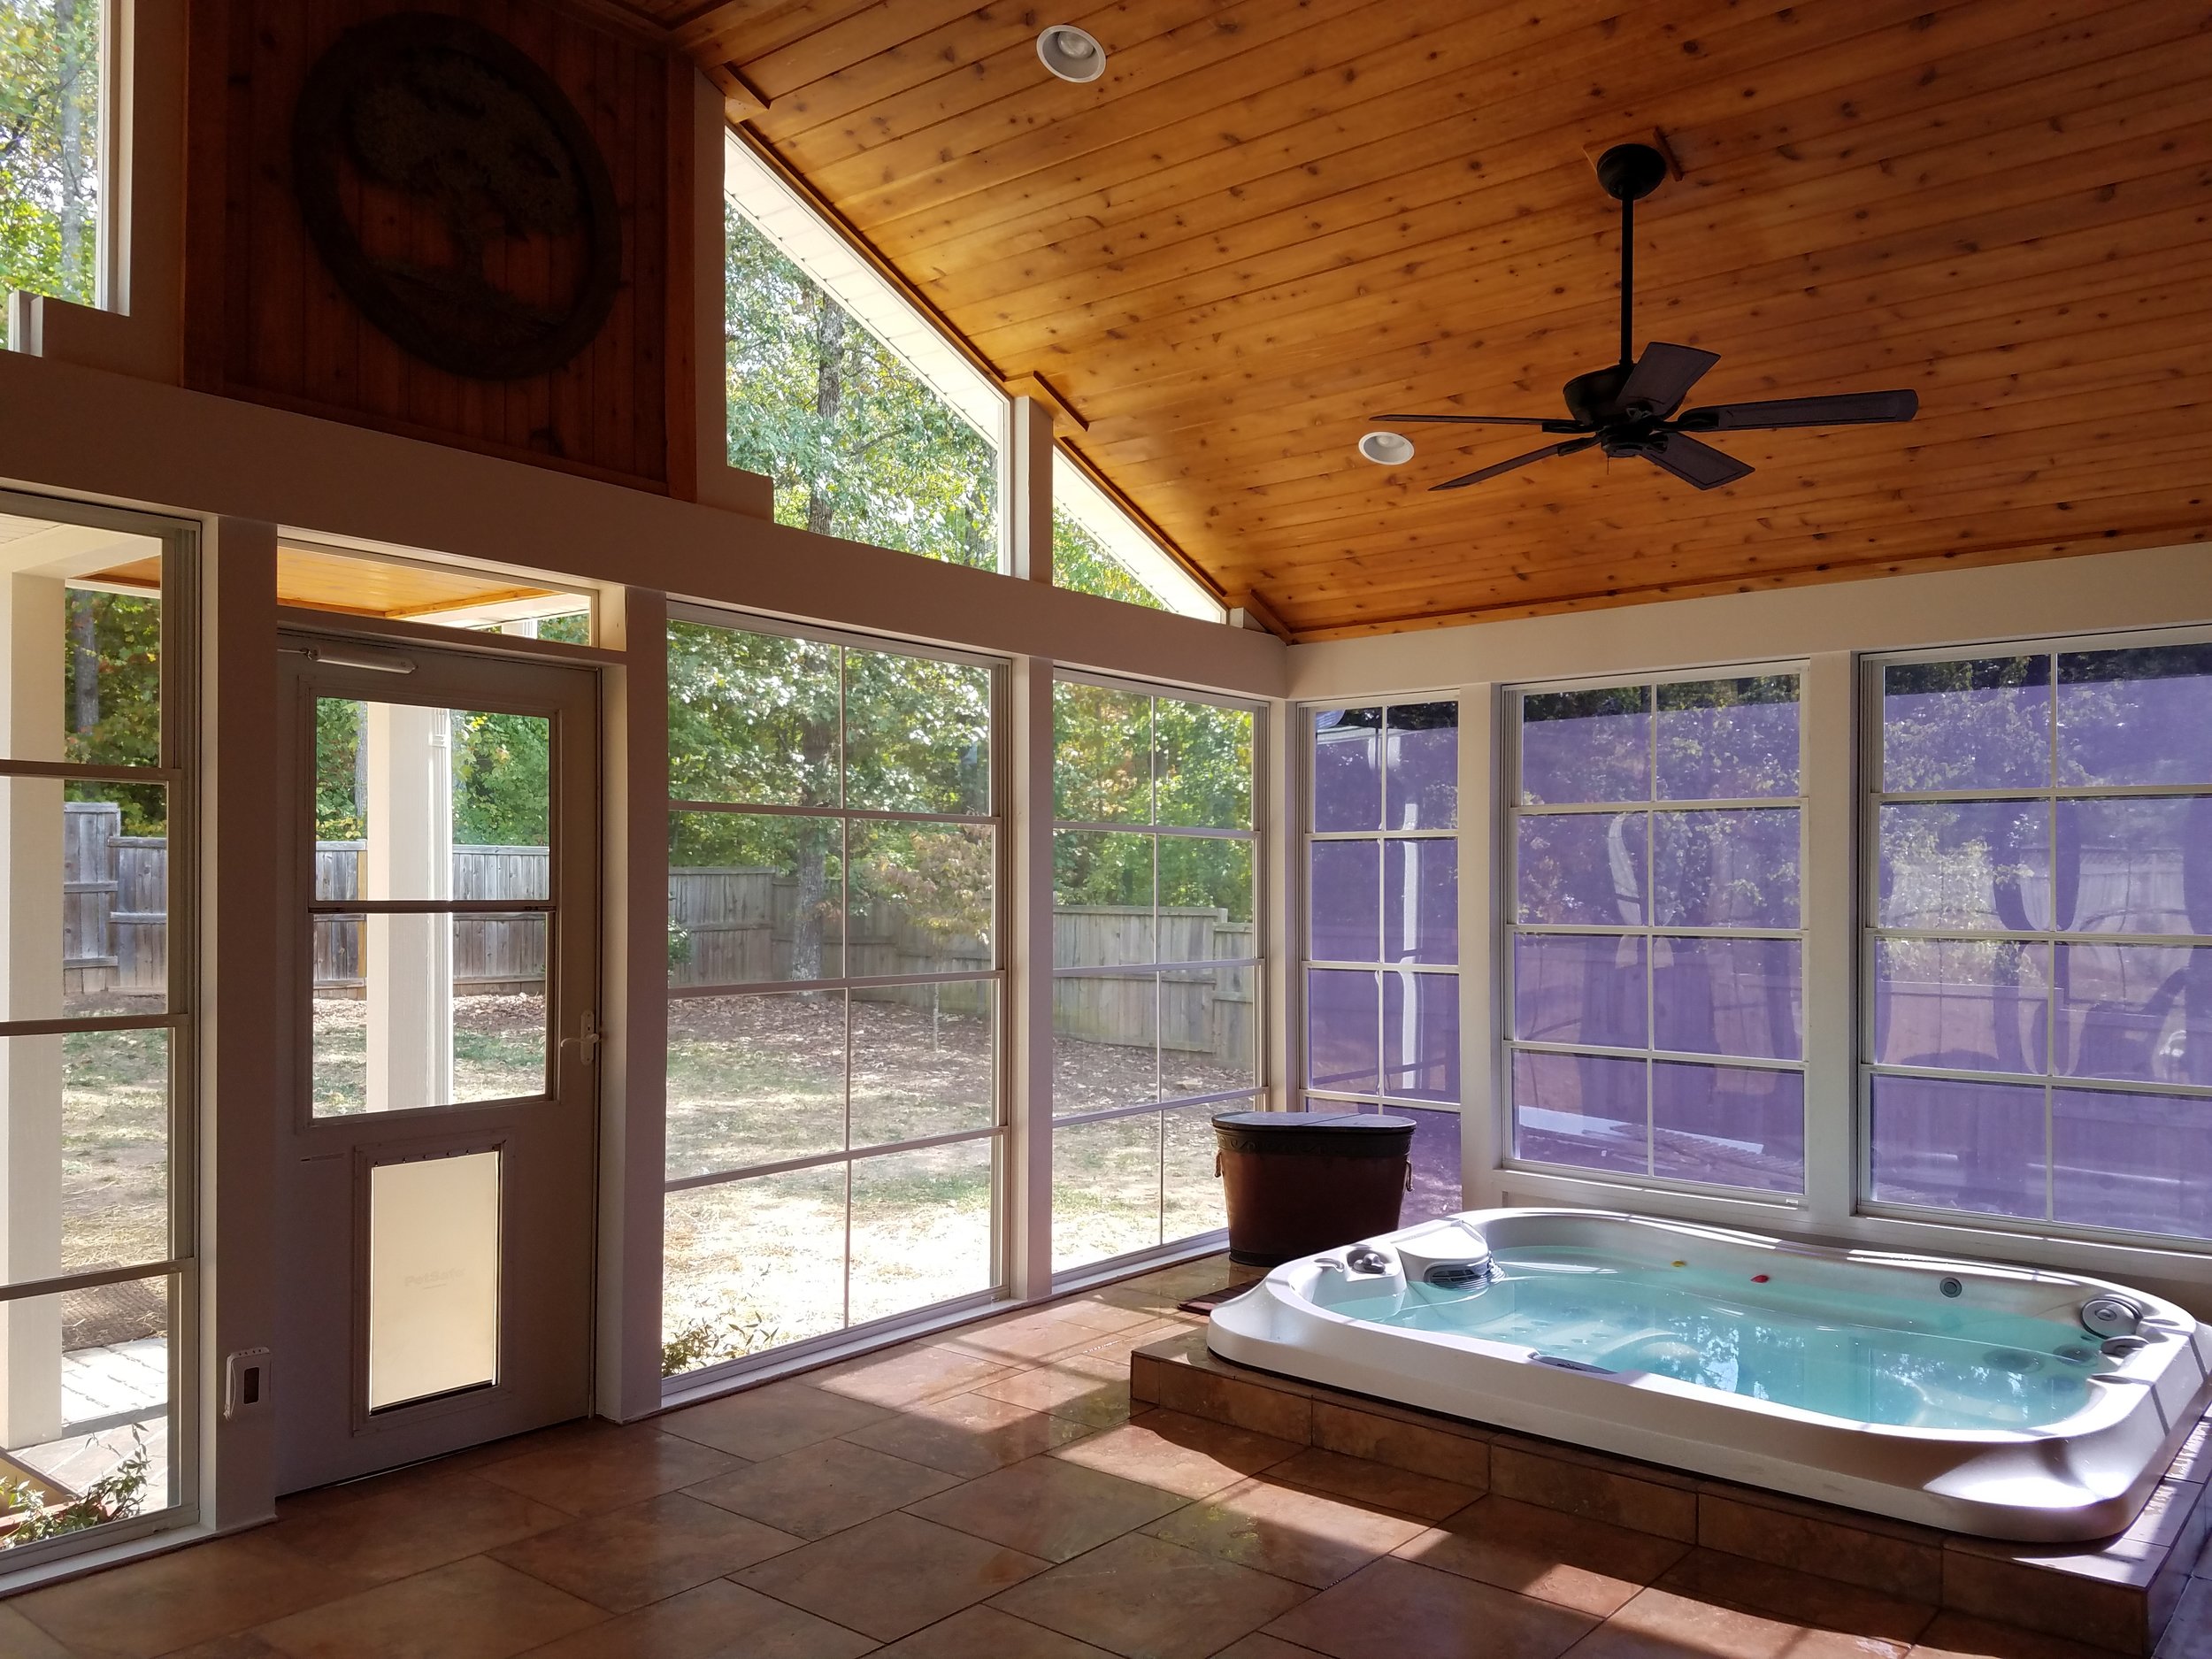 Screened Porch with Hot Tub and EZE Breeze Windows — DeckScapes Hot Tub In Screened In Porch